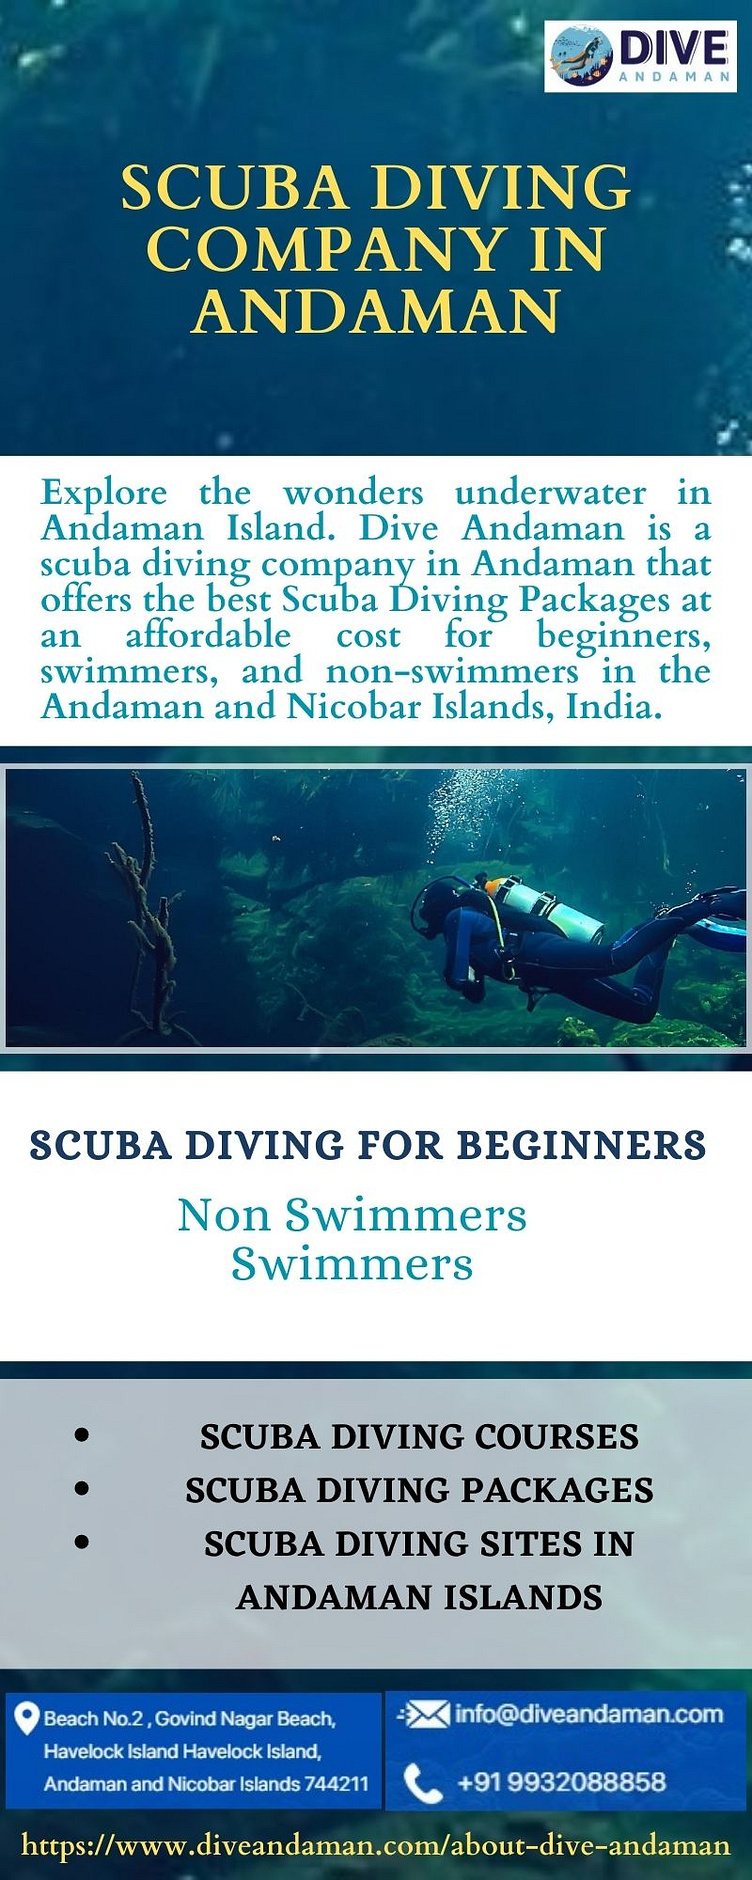 Scuba Diving Company in Andaman by Dive Andaman on Dribbble